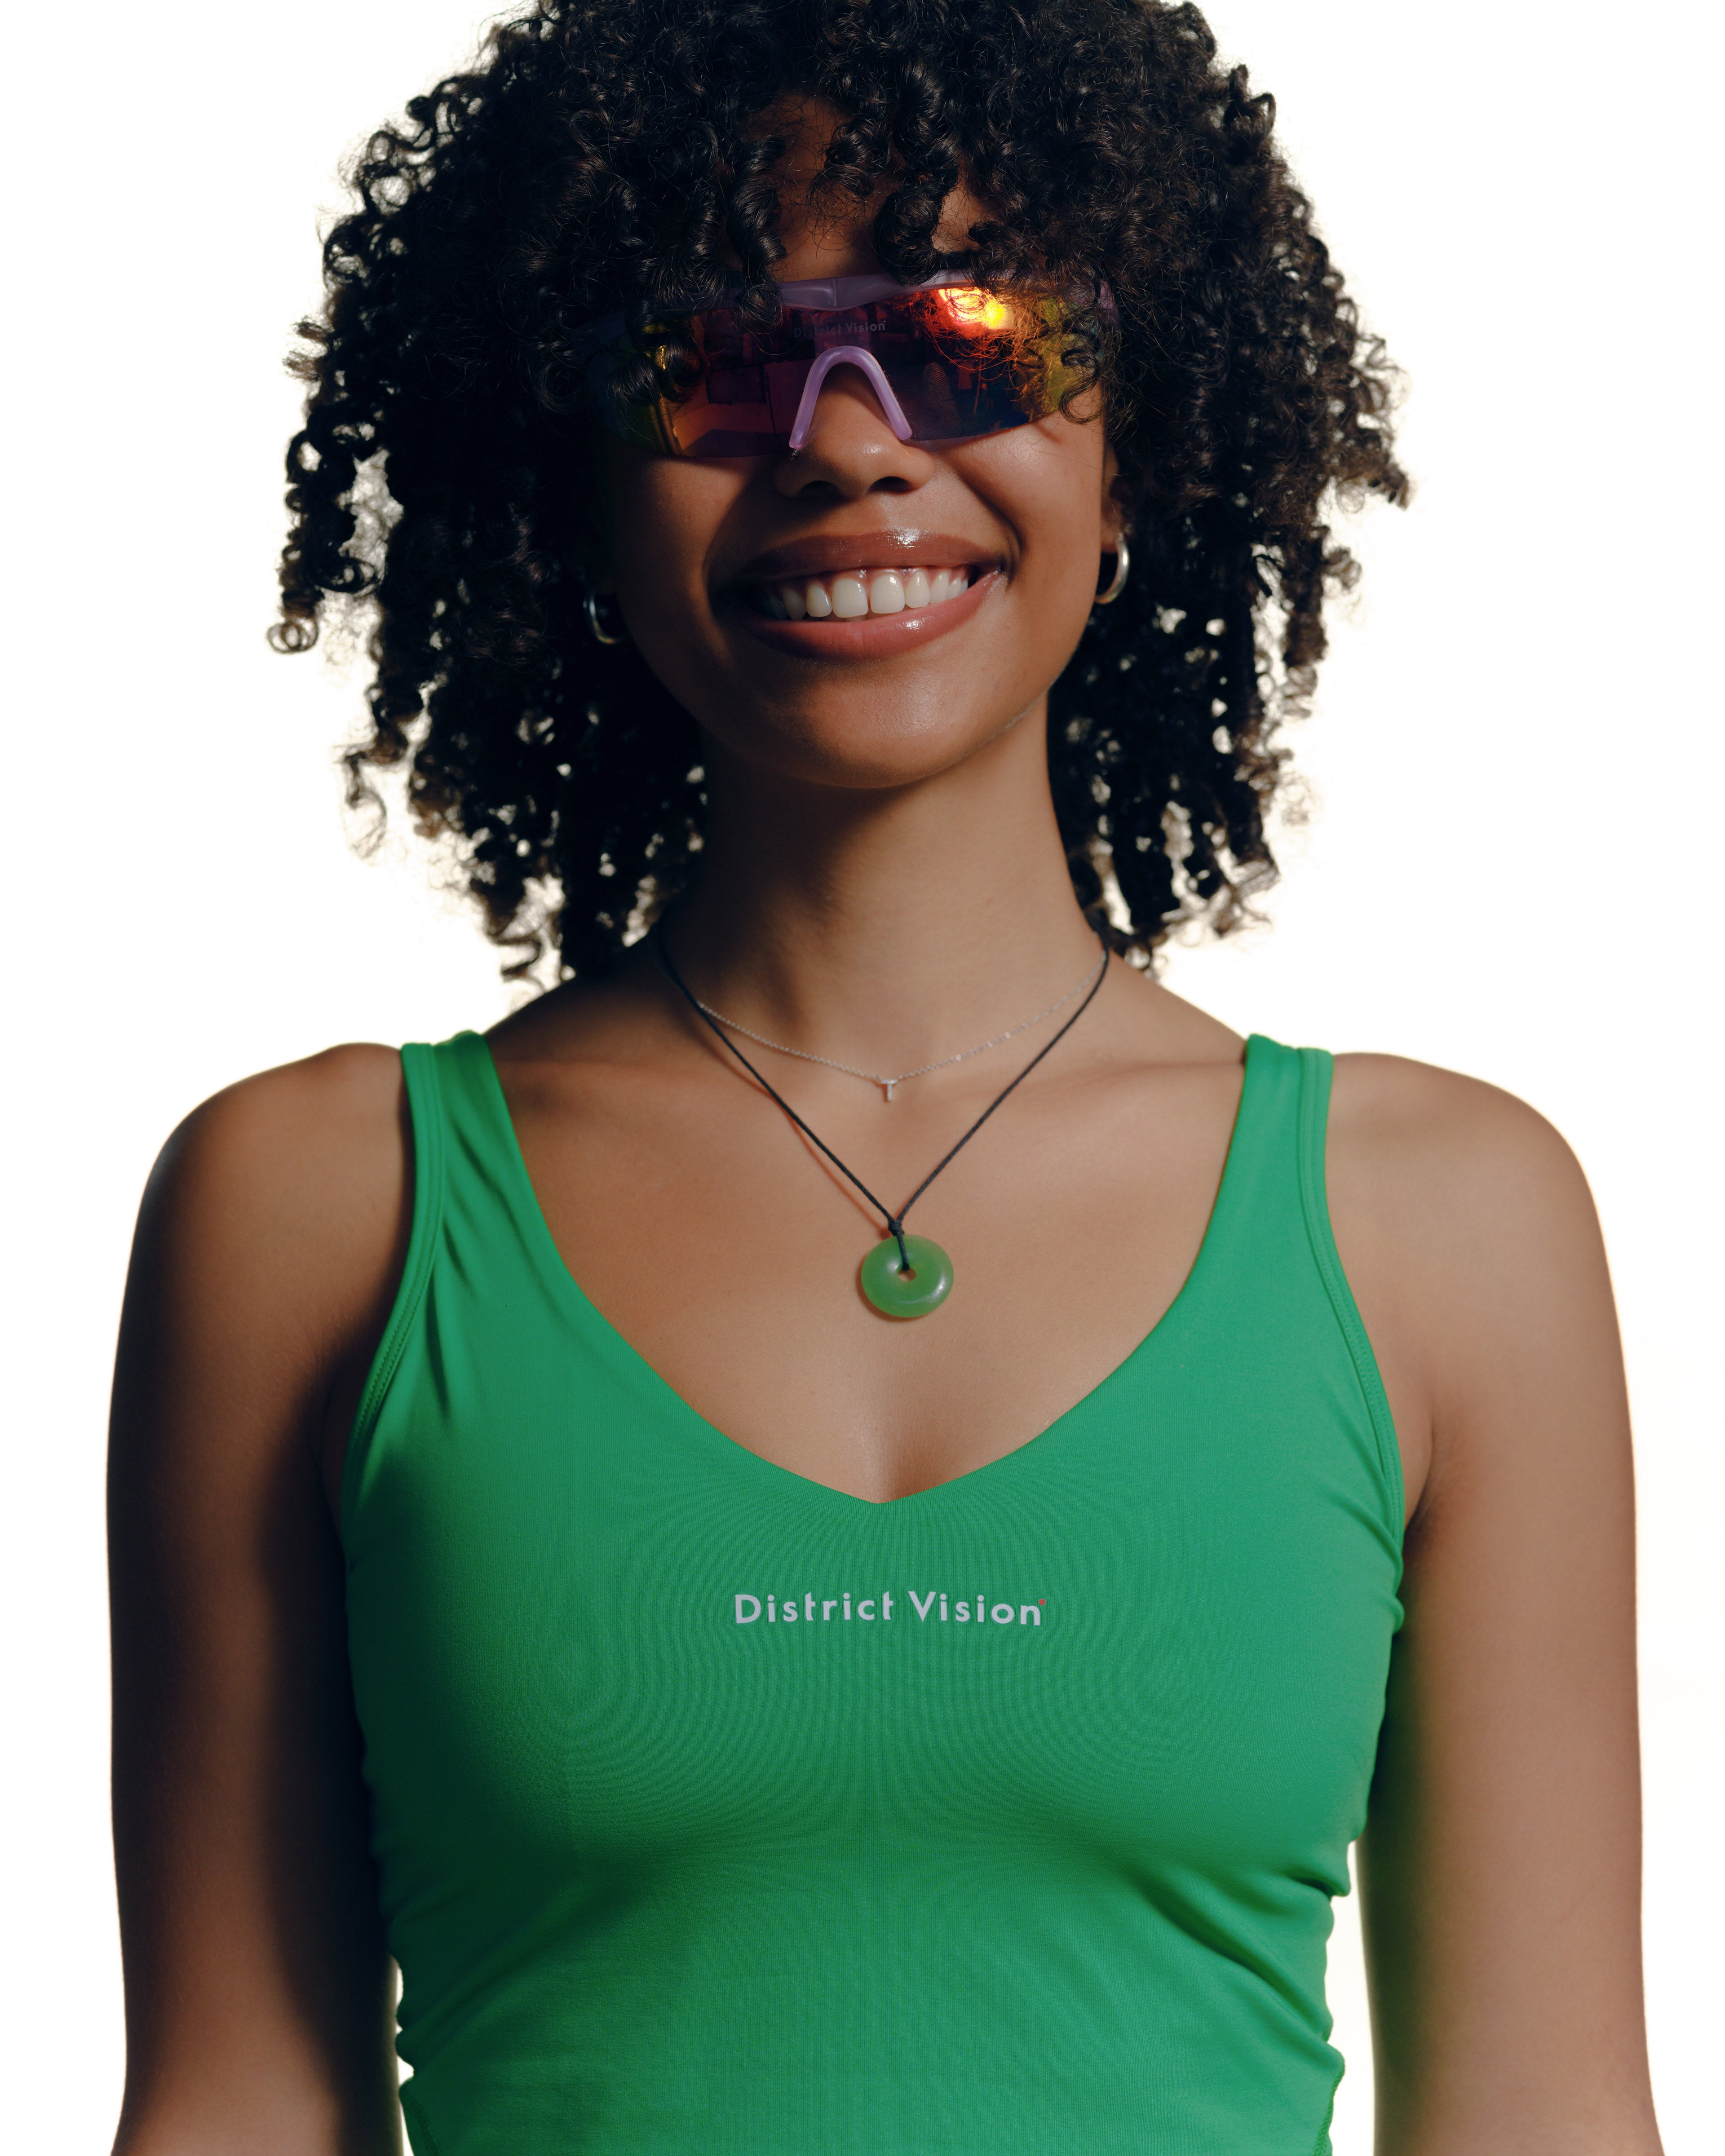 A woman wearing District Vision sunglasses and sports bra